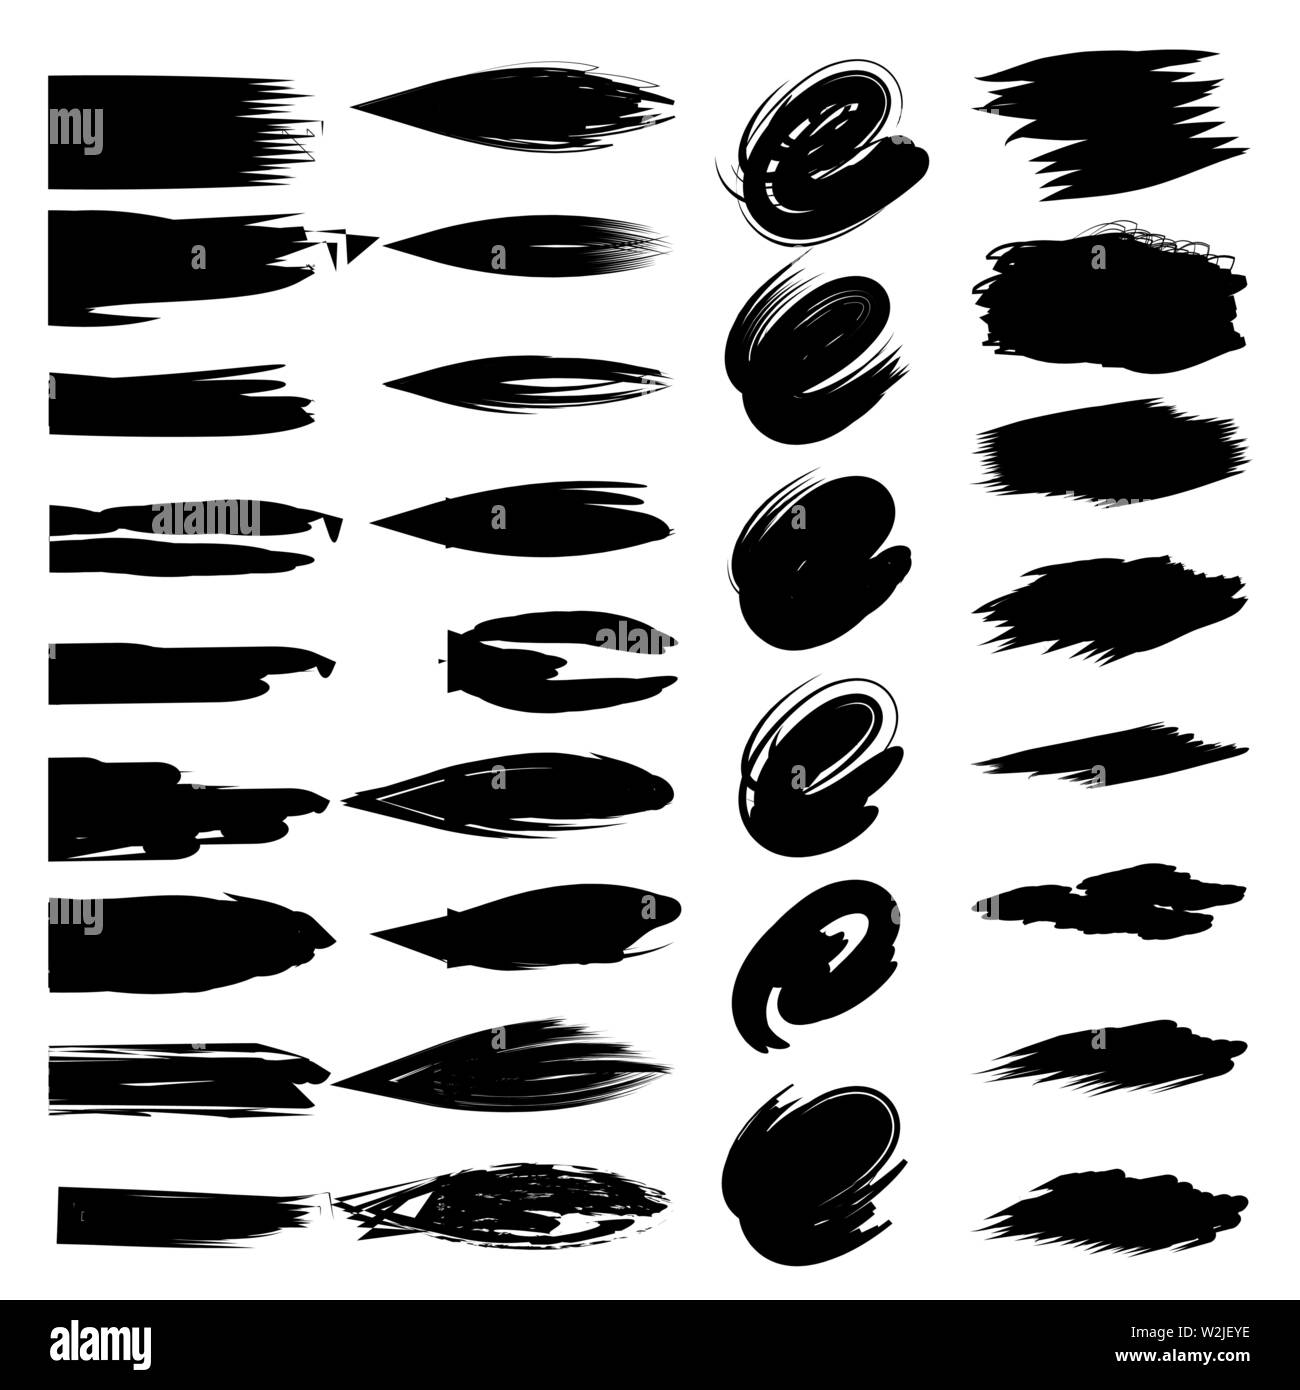 Paint brush stroke Stock Vector Images - Alamy